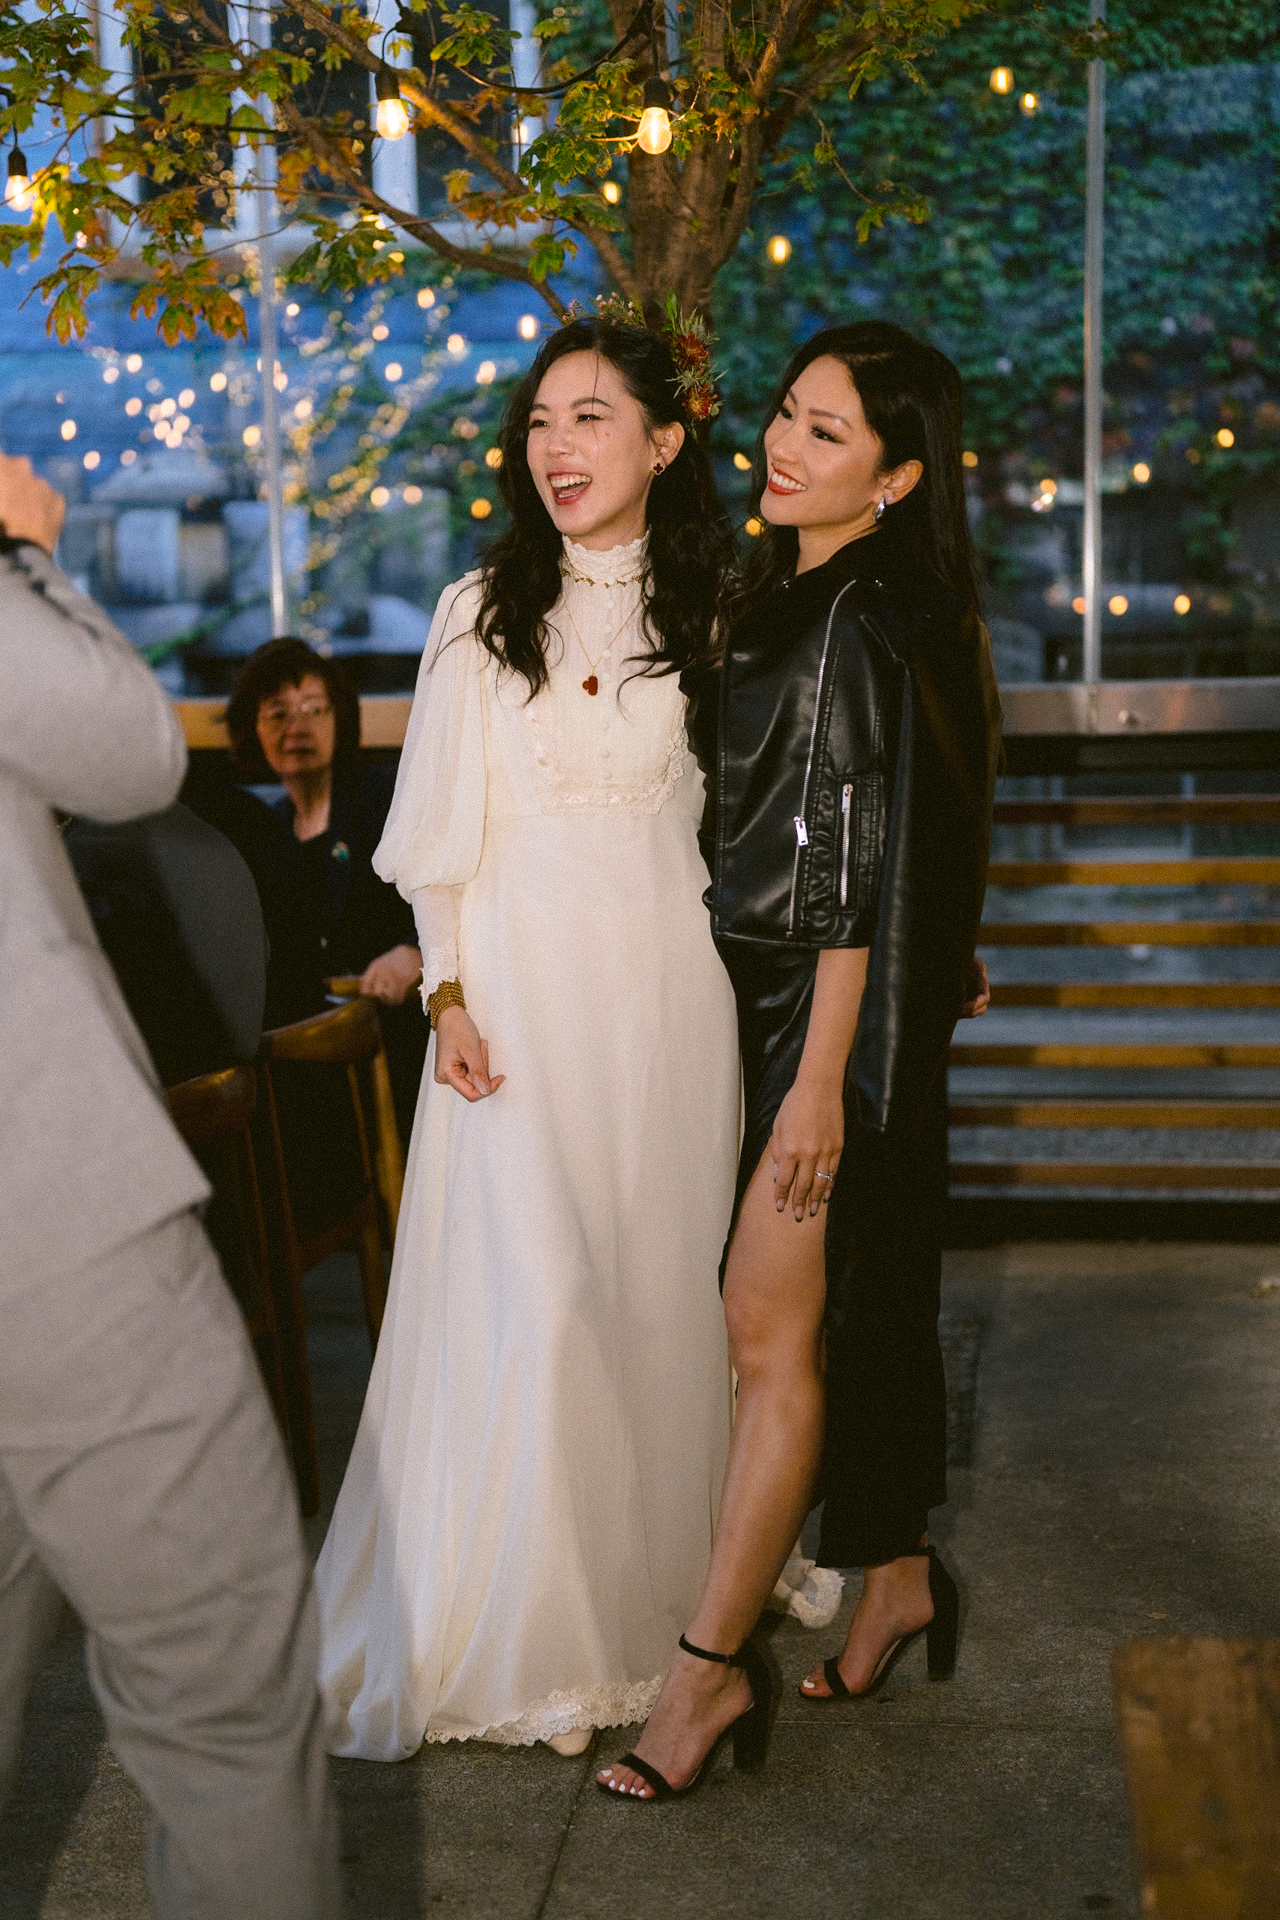 Two women posing for a photograph at an evening event, one in a white dress and the other in black attire, with string lights in the background.